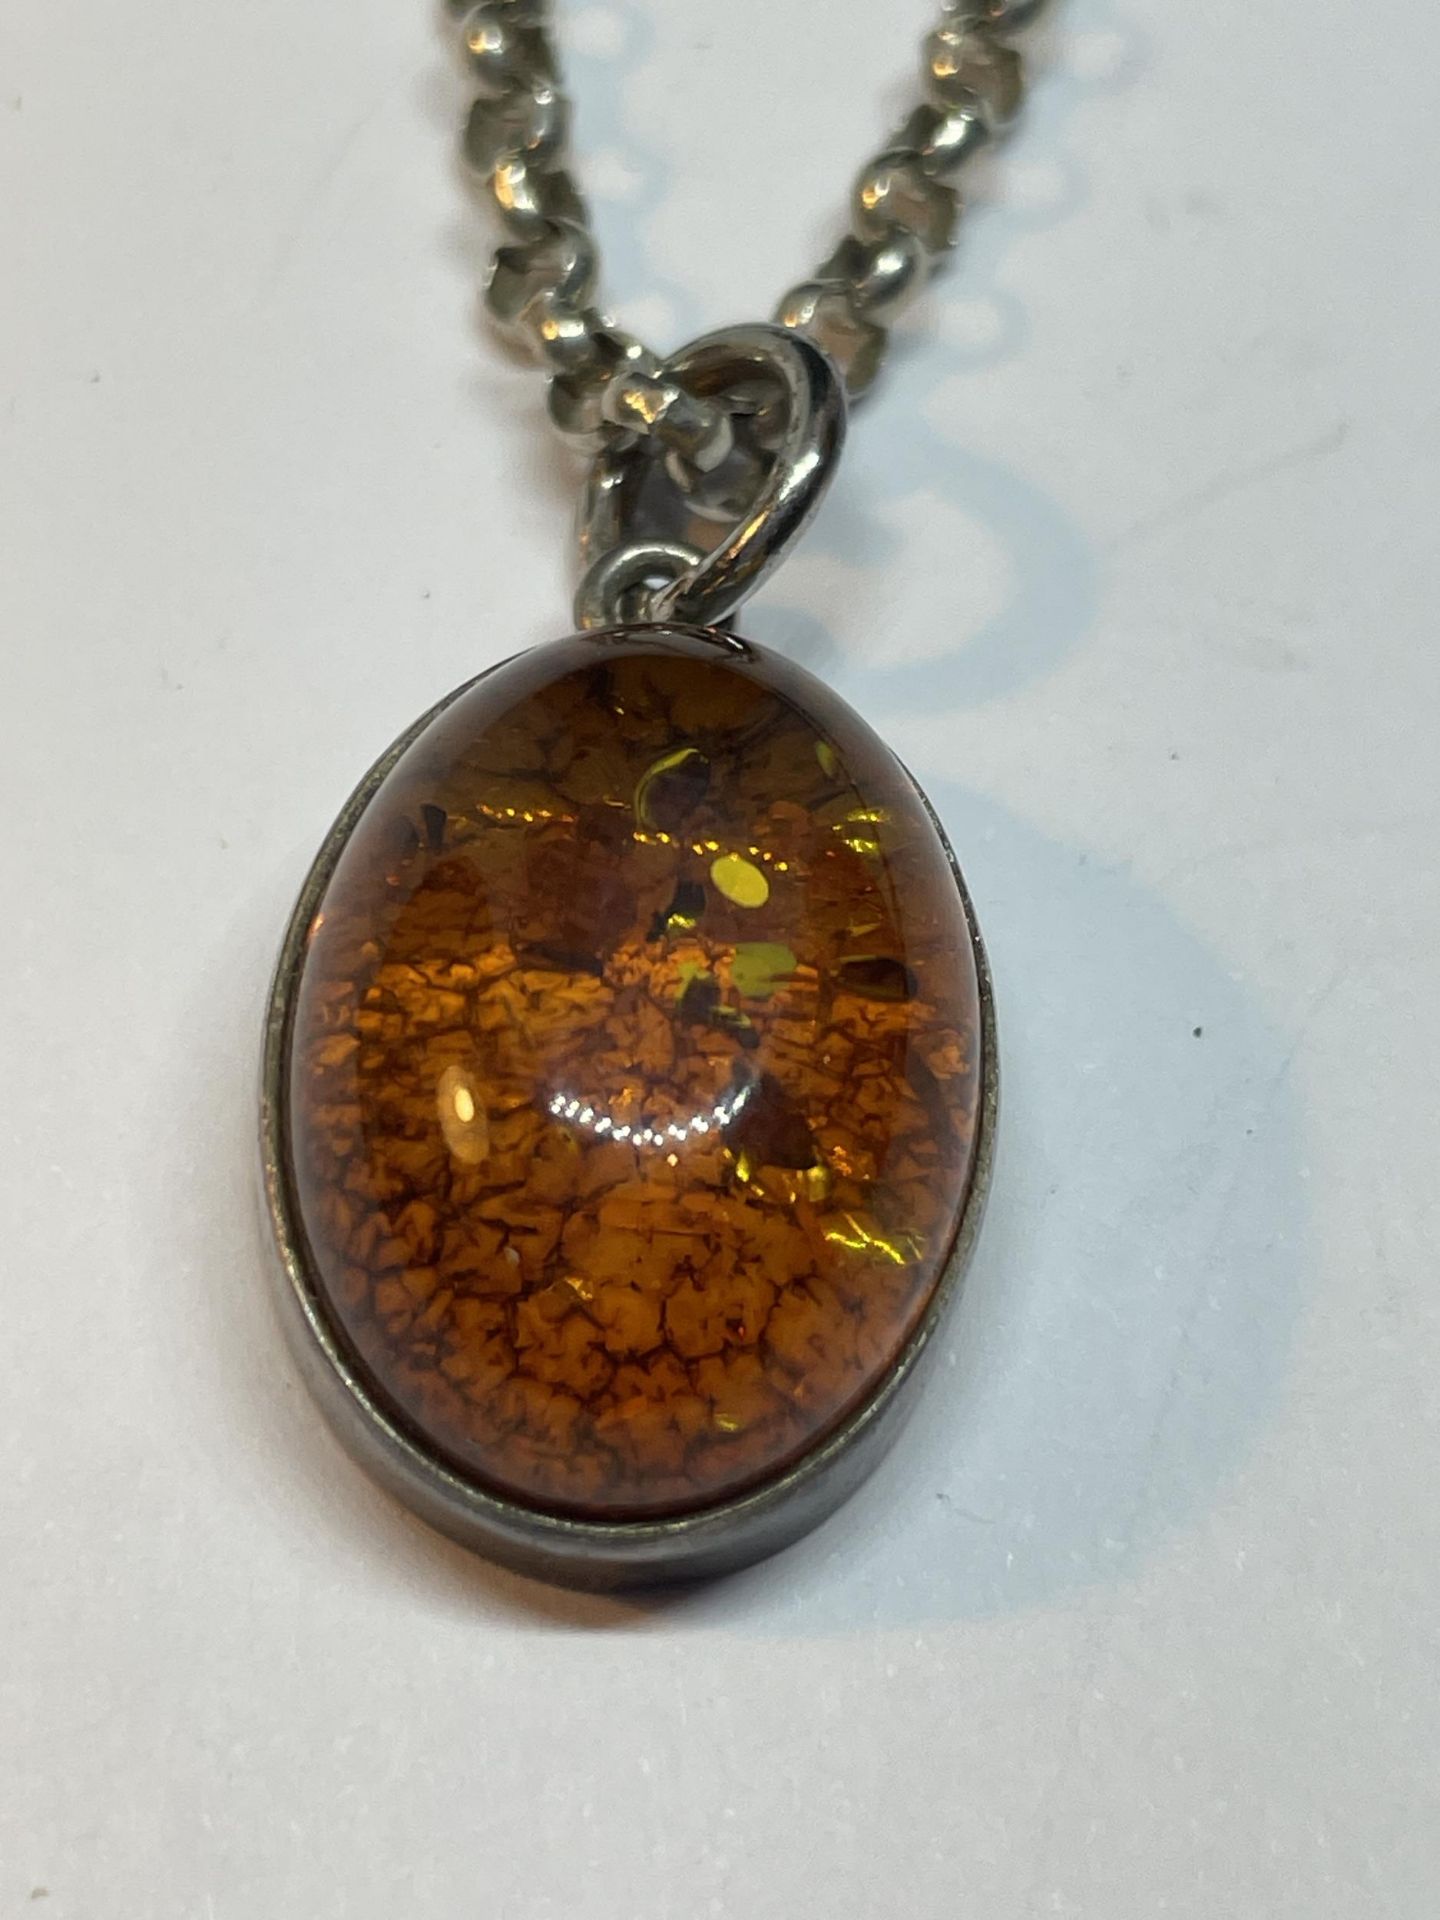 A SILVER NECKLACE WITH AMBER PENDANT - Image 2 of 3